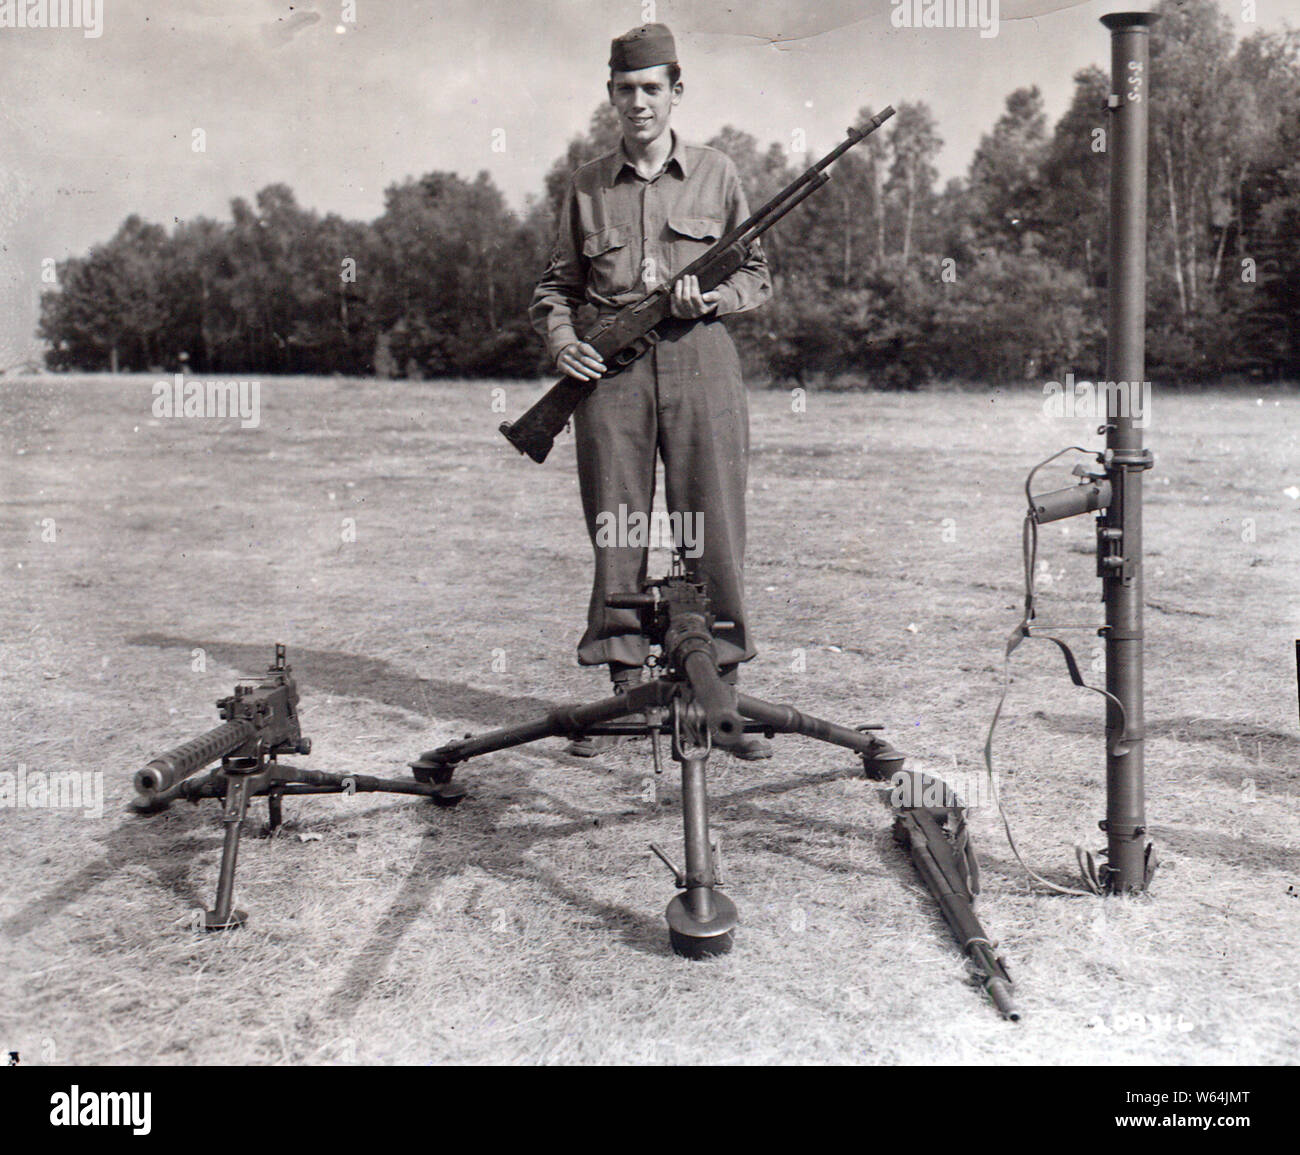 T/Sgt Currey, Francis S., Co. K 120th Infant Regt, 30th Infantry Div. of Hurleysville NY,used these weapons while halting a German attack on his company during the Battle of the Bulge. Maj. Gen. Leland S. Hobbs, CG, 30th infantry division, presented him with the Nation's highest award, the Medal of Honor at Camp Oklahoma City redeployment center near Reims France. Stock Photo